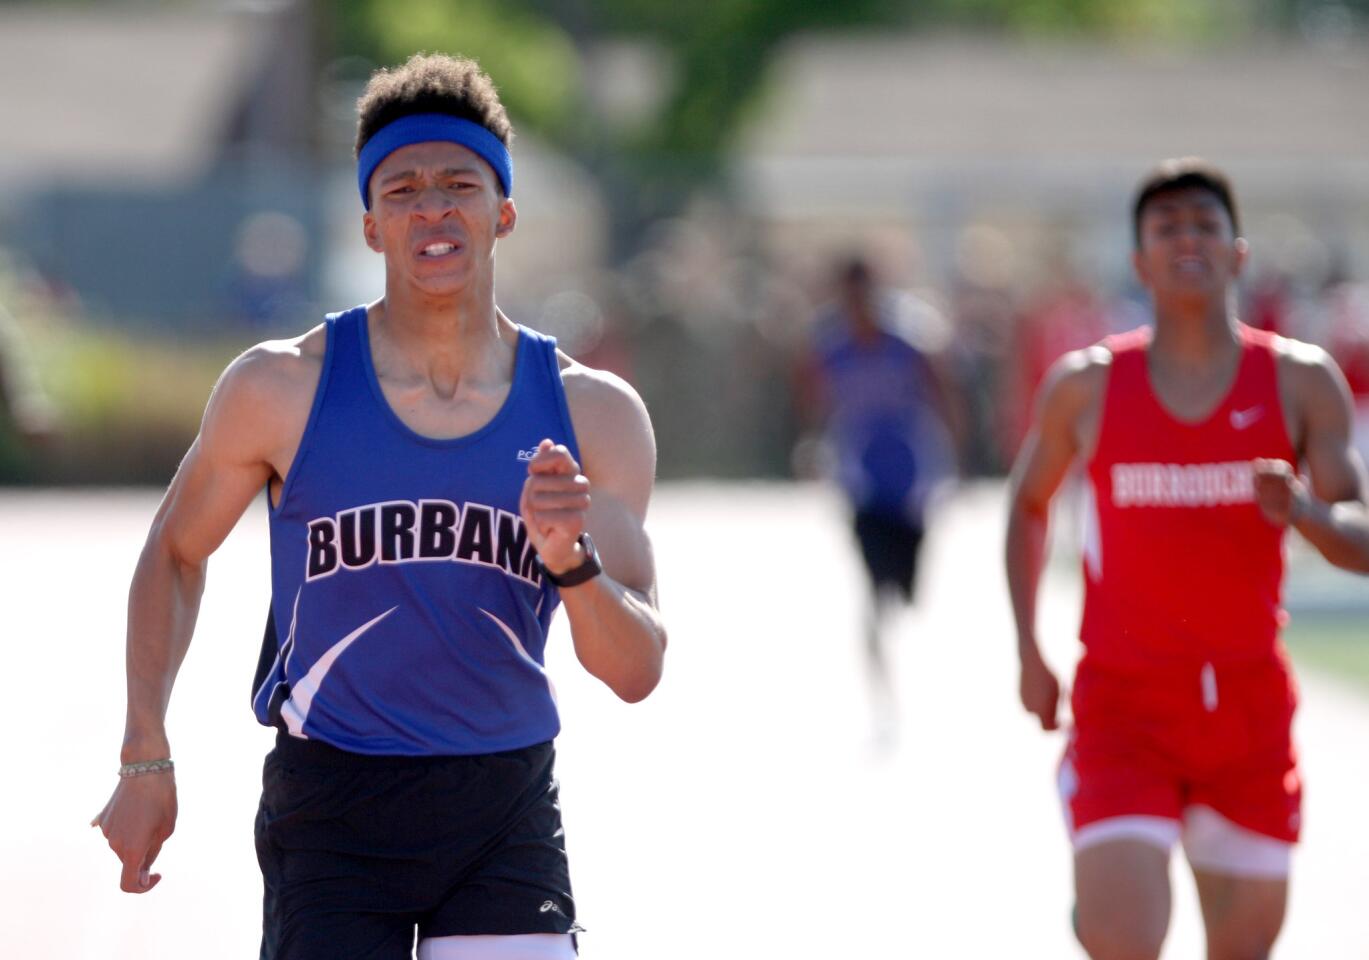 Burbank High School's runner Josh Cantong wins the 400-meter race vs. Burroughs High School at Burroughs in Pacific League track meet, in Burbank on Wednesday, April 20, 2016.